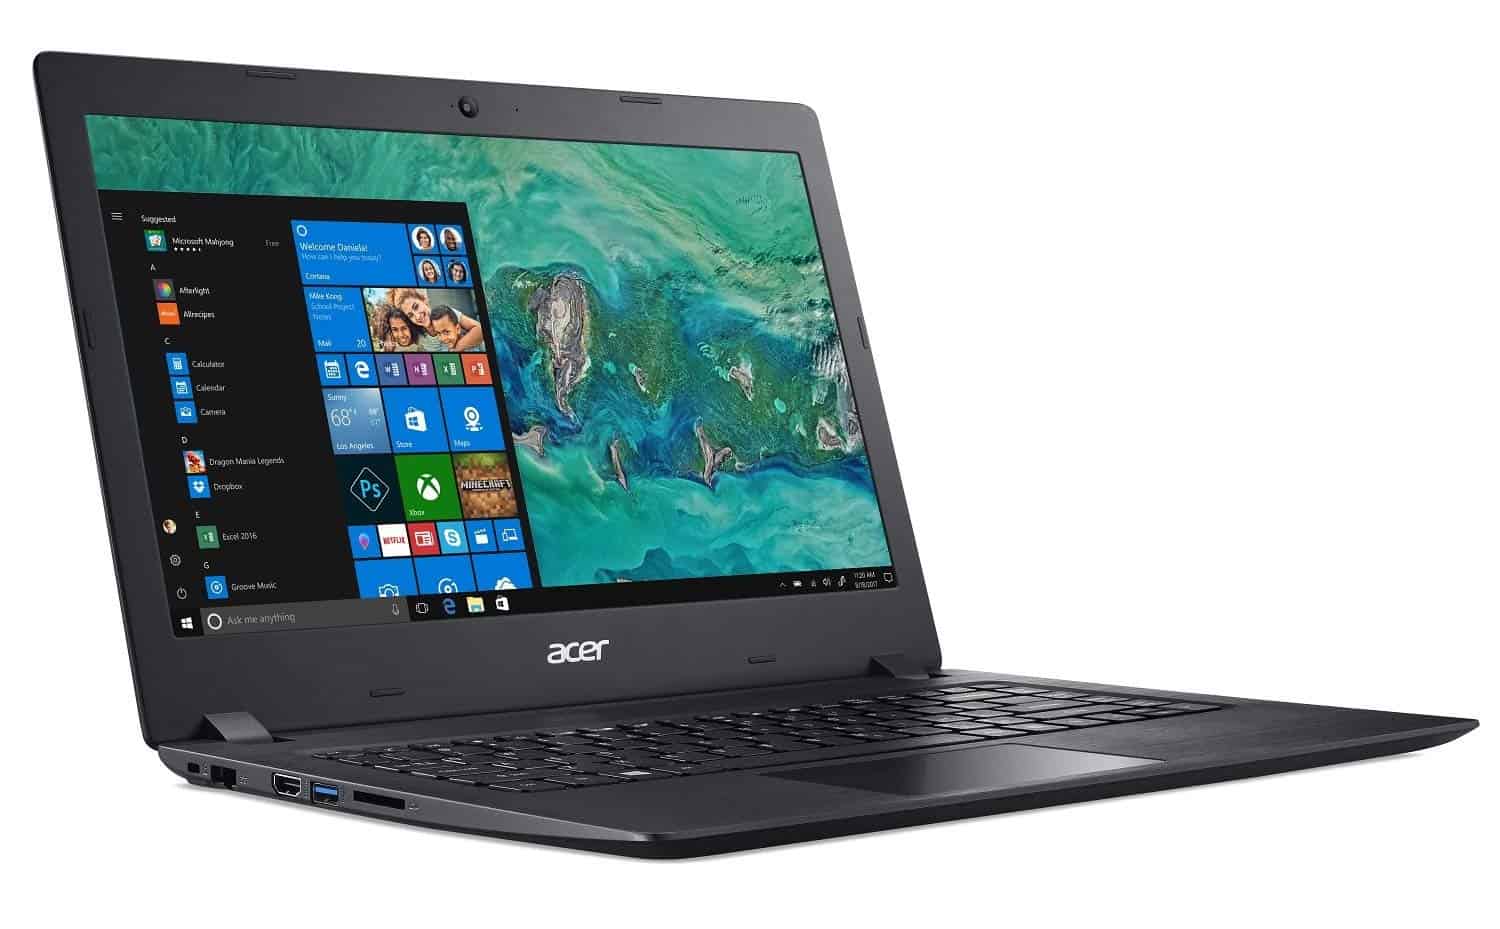 online contests, sweepstakes and giveaways - Acer Aspire Laptop Giveaway • Steamy Kitchen Recipes